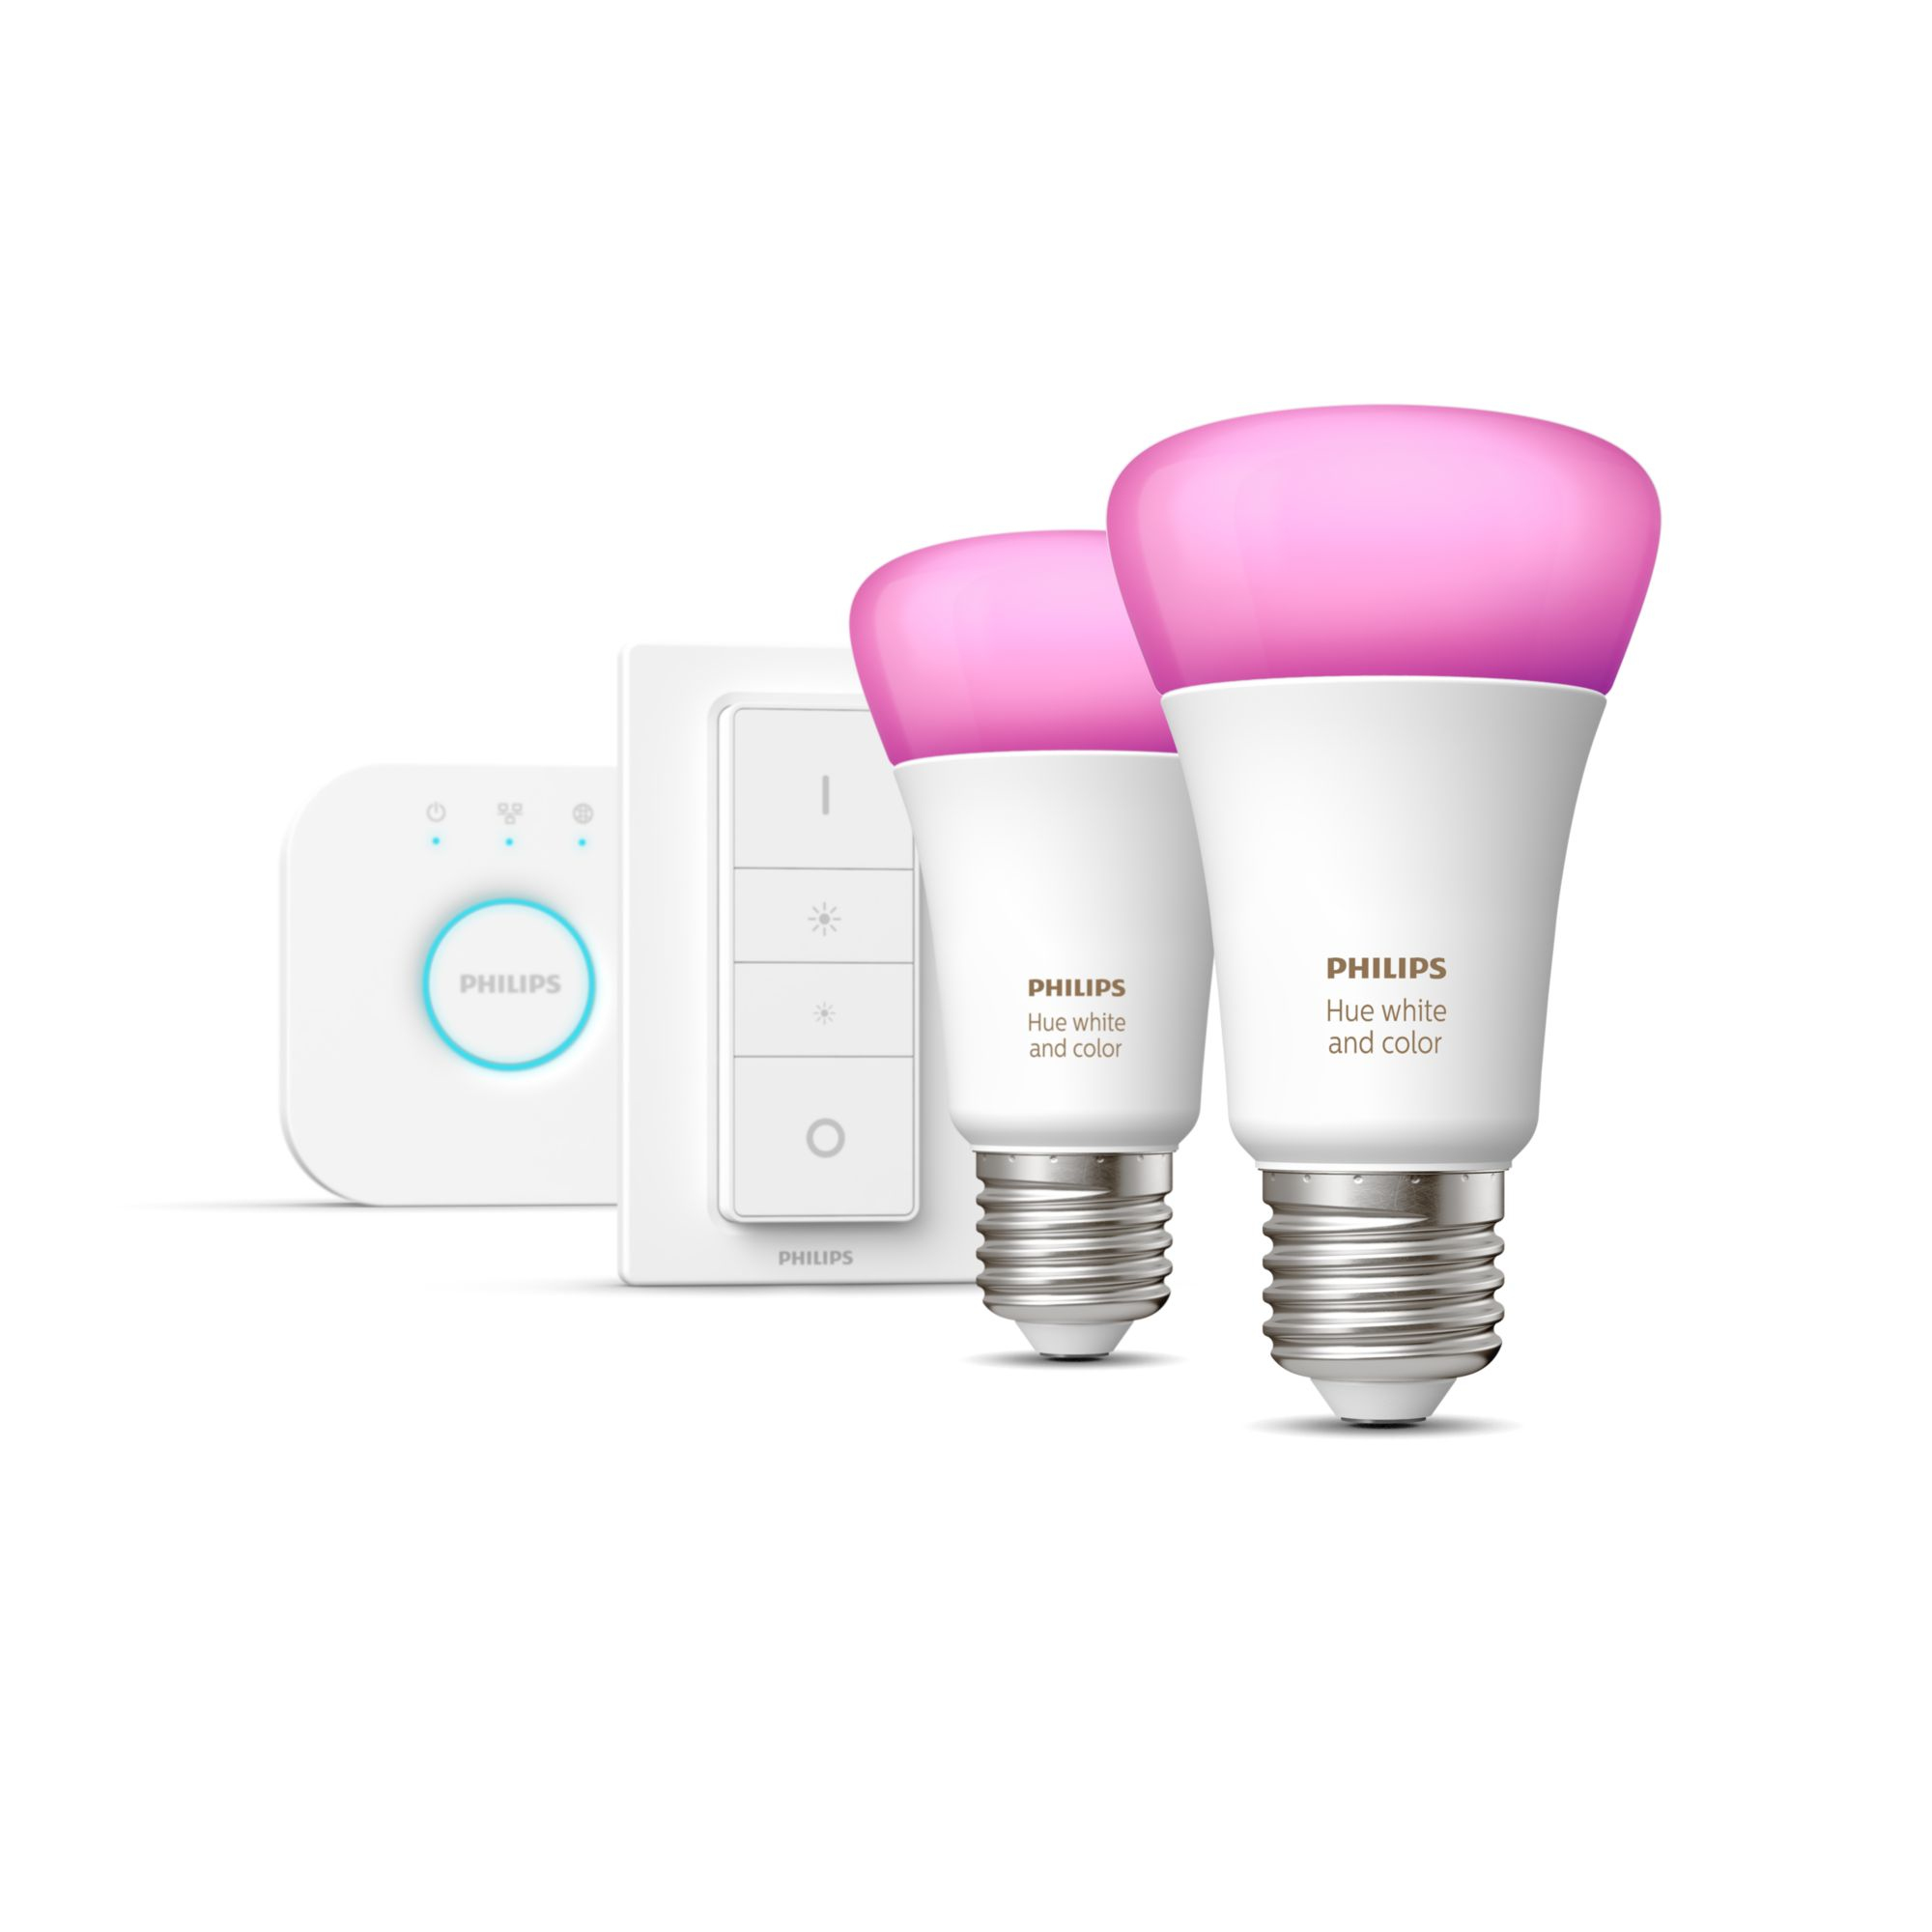 Philips by Signify starterkit E27